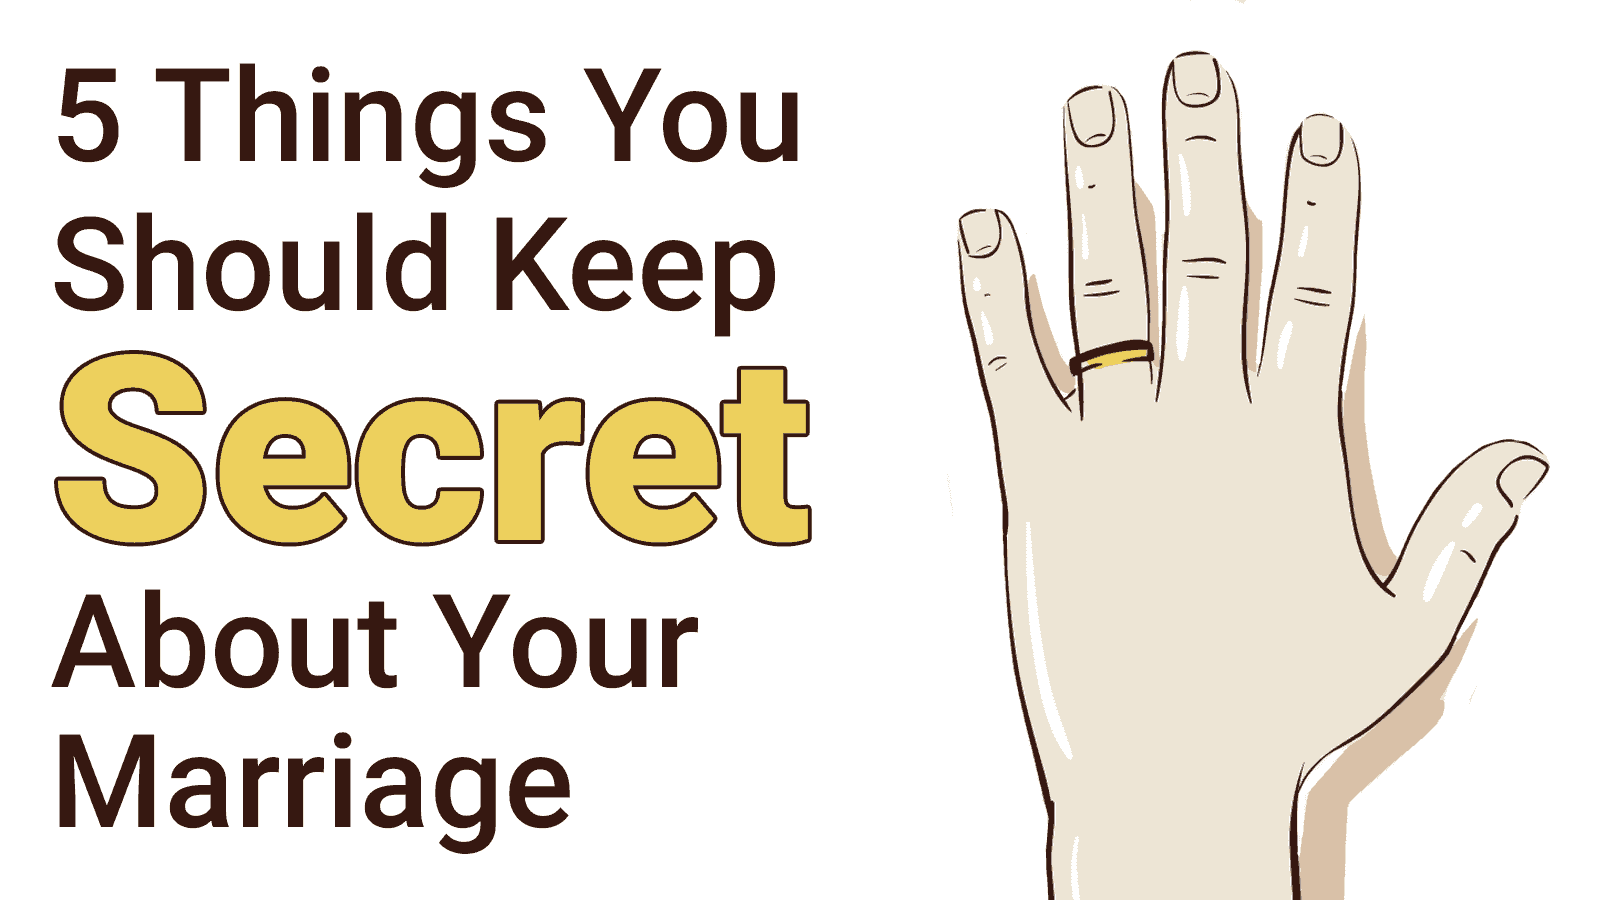 5 Things You Should Keep Secret About Your Marriage